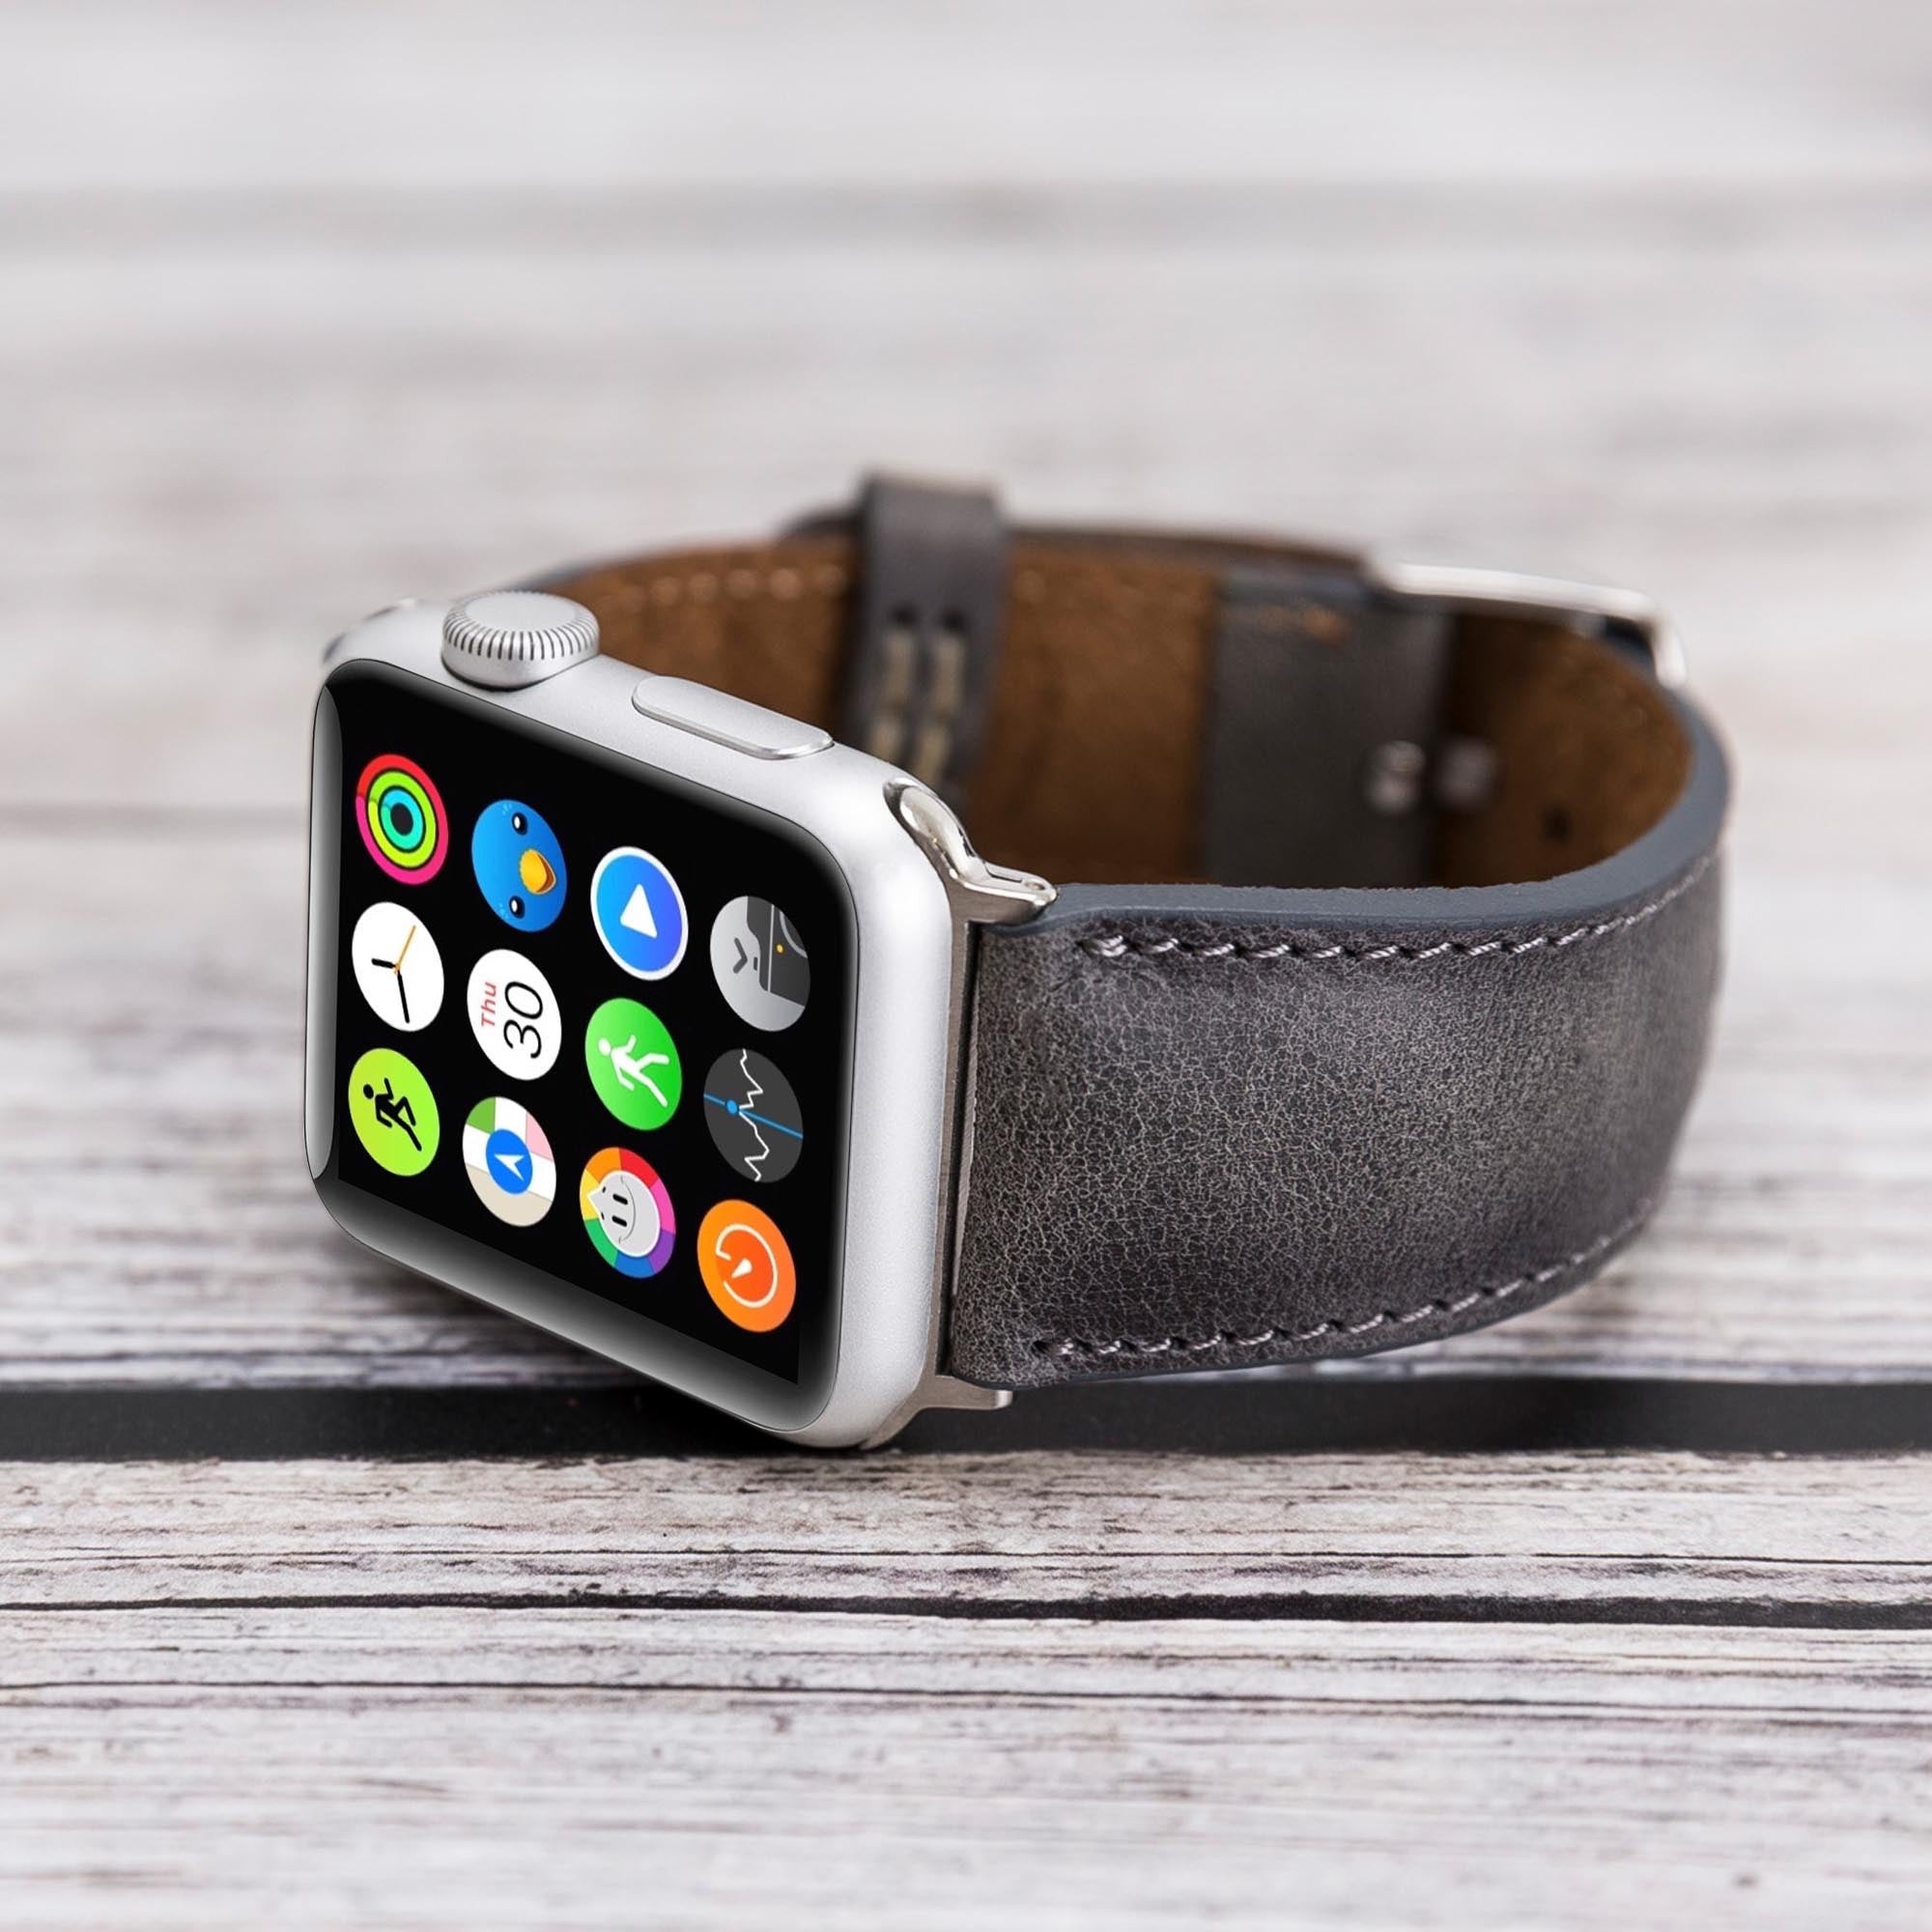 Full Grain Leather Band for Apple Watch - EFFECT GRAY - saracleather